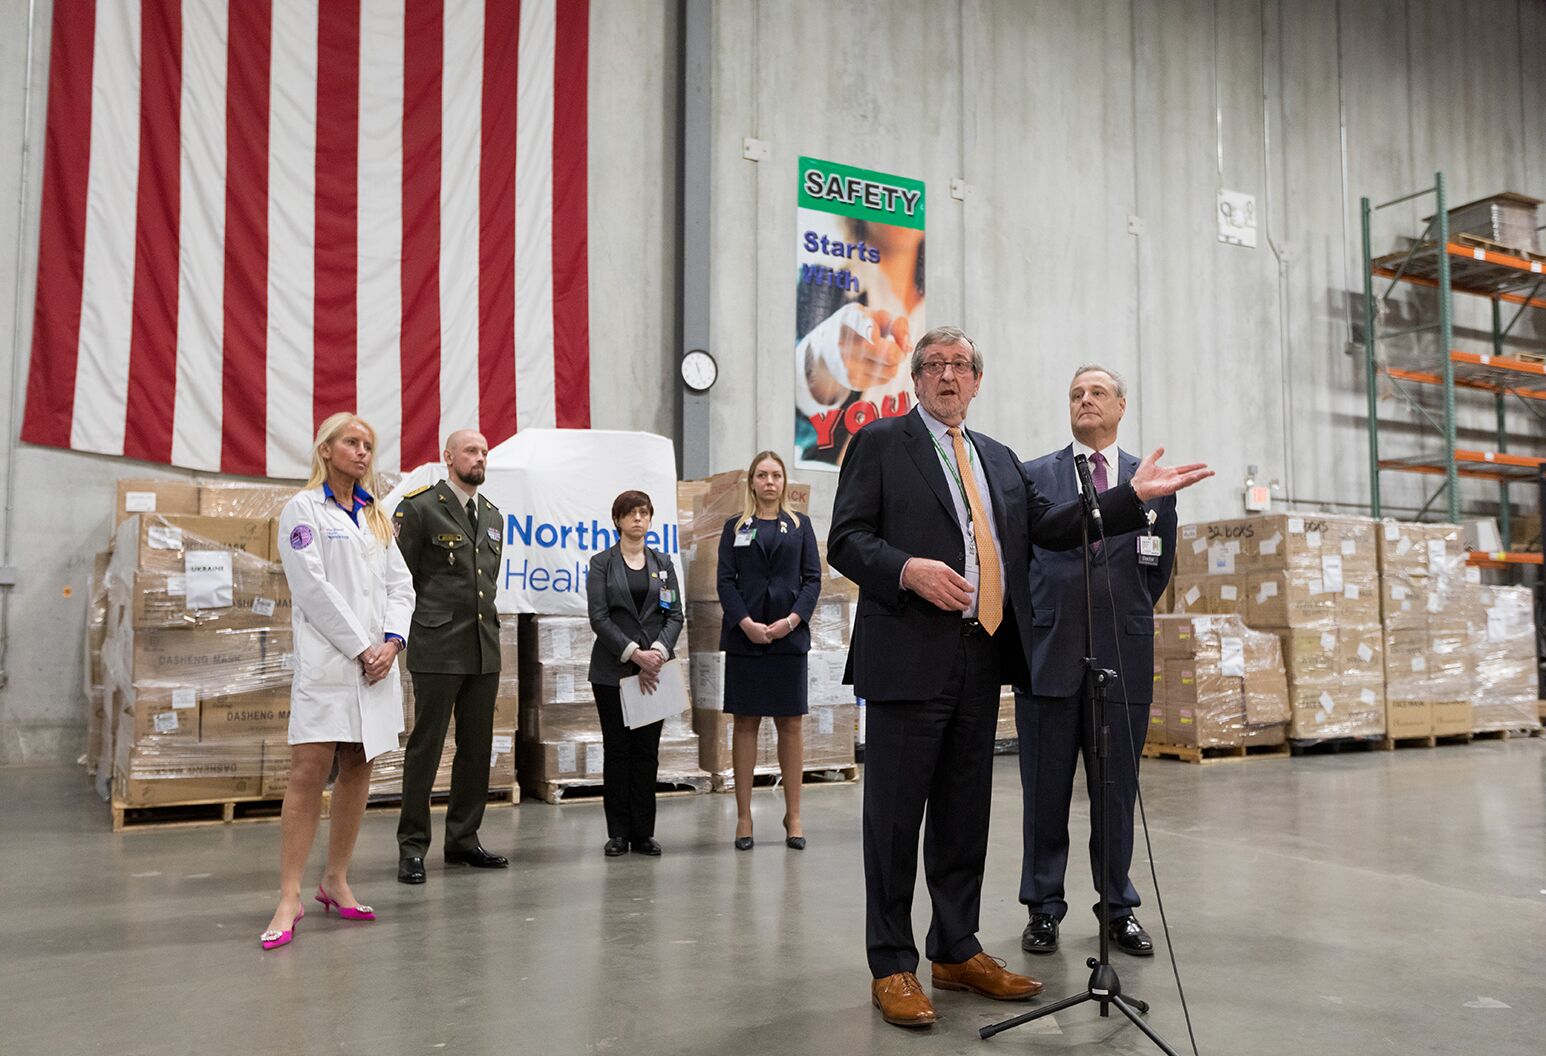 Man standing in a room speaking with people and a large stack of boxes in the background